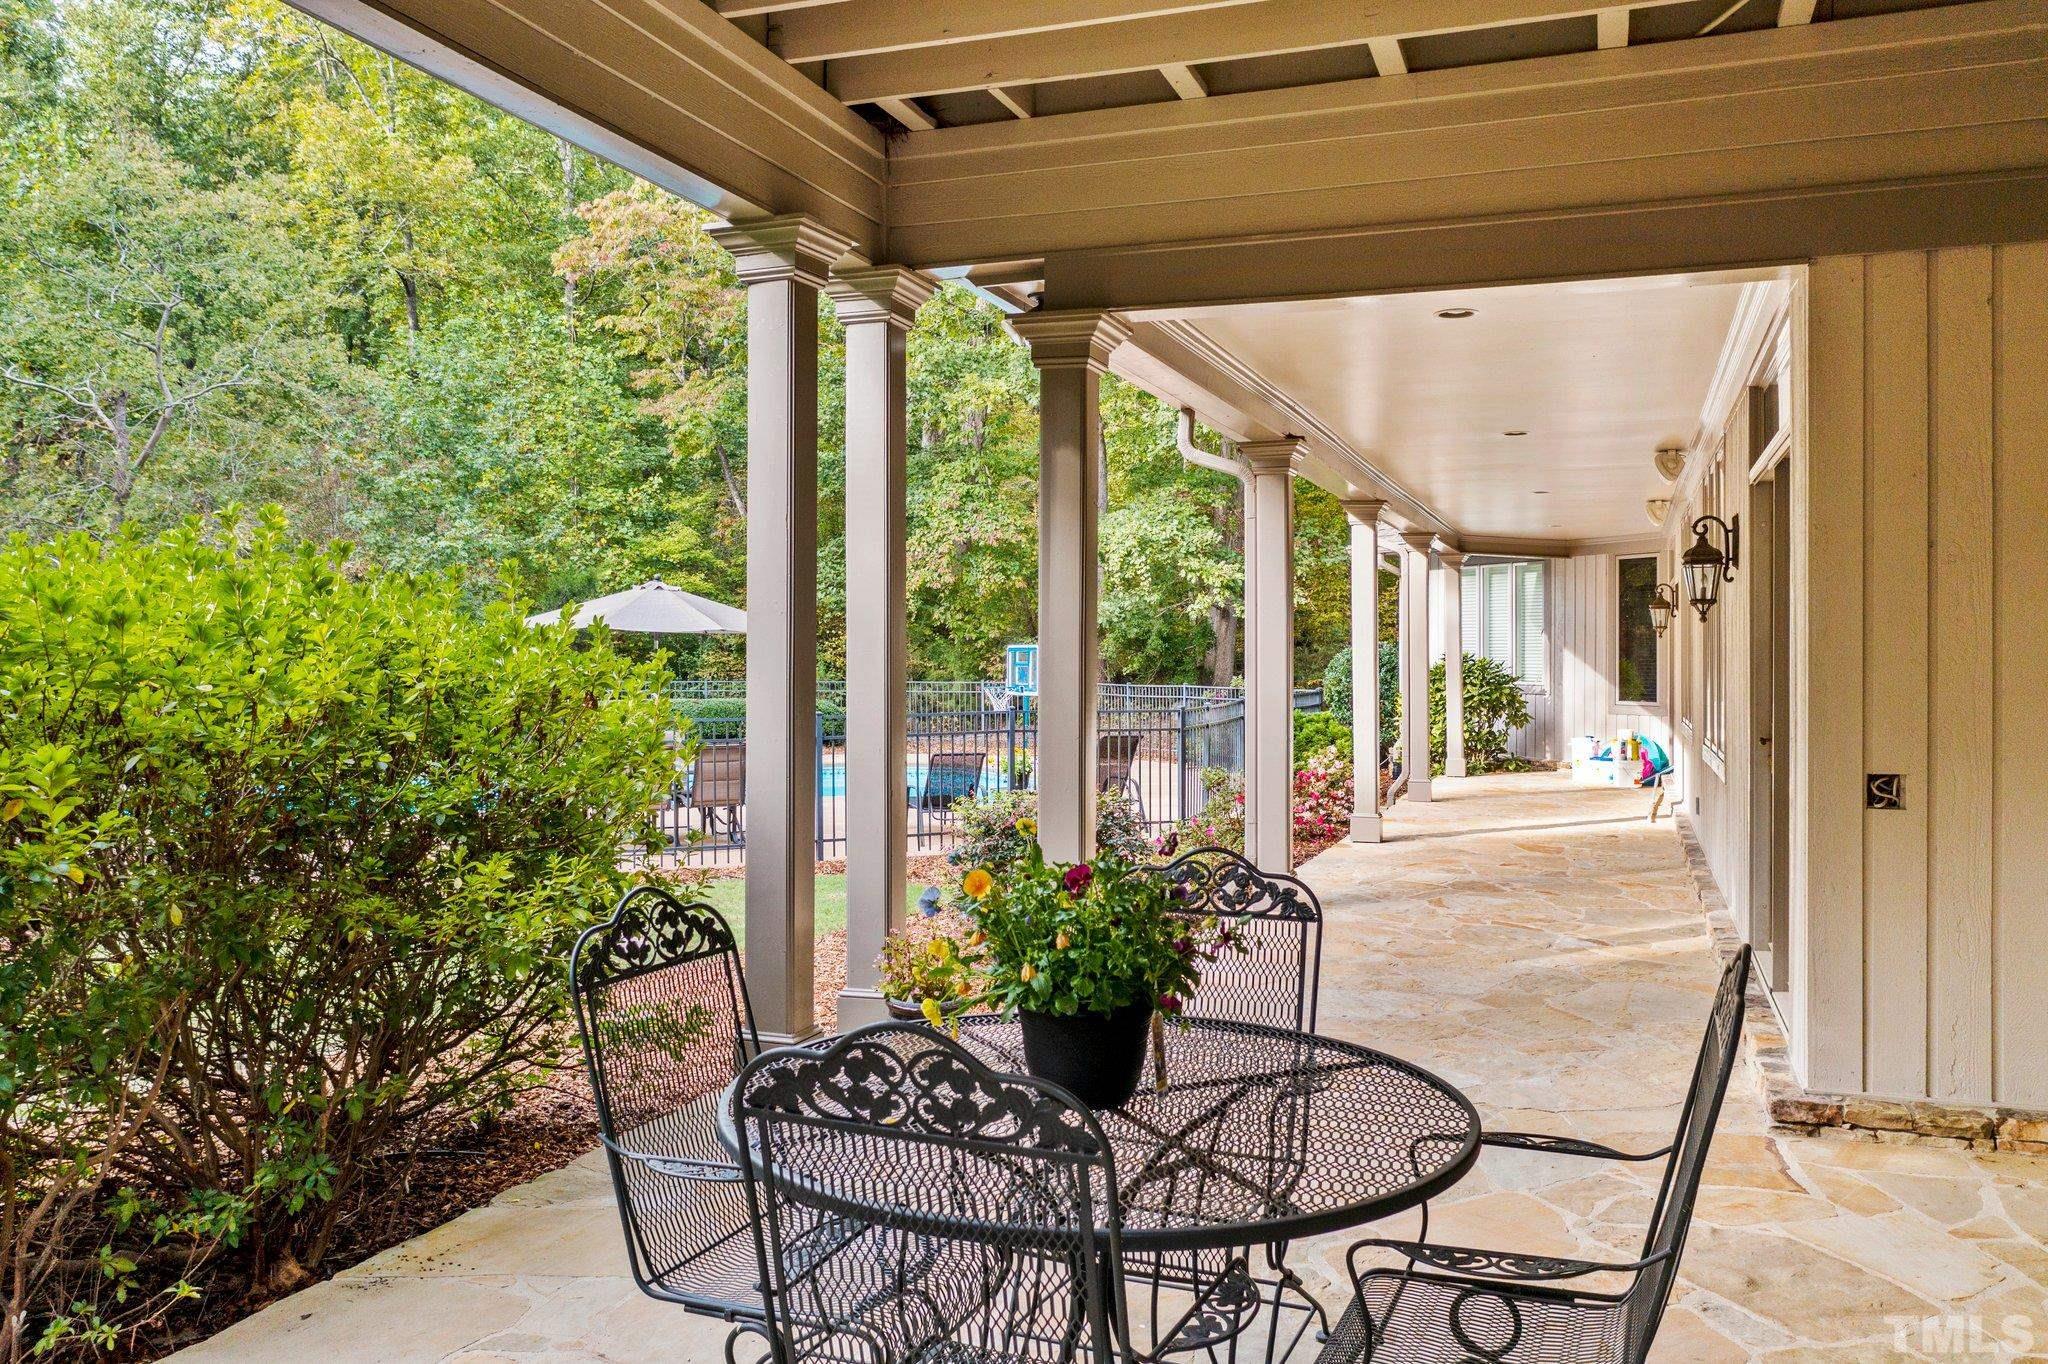 This beautiful porch runs along the whole back of the home and is a great space for entertaining! Lots of room for large gatherings